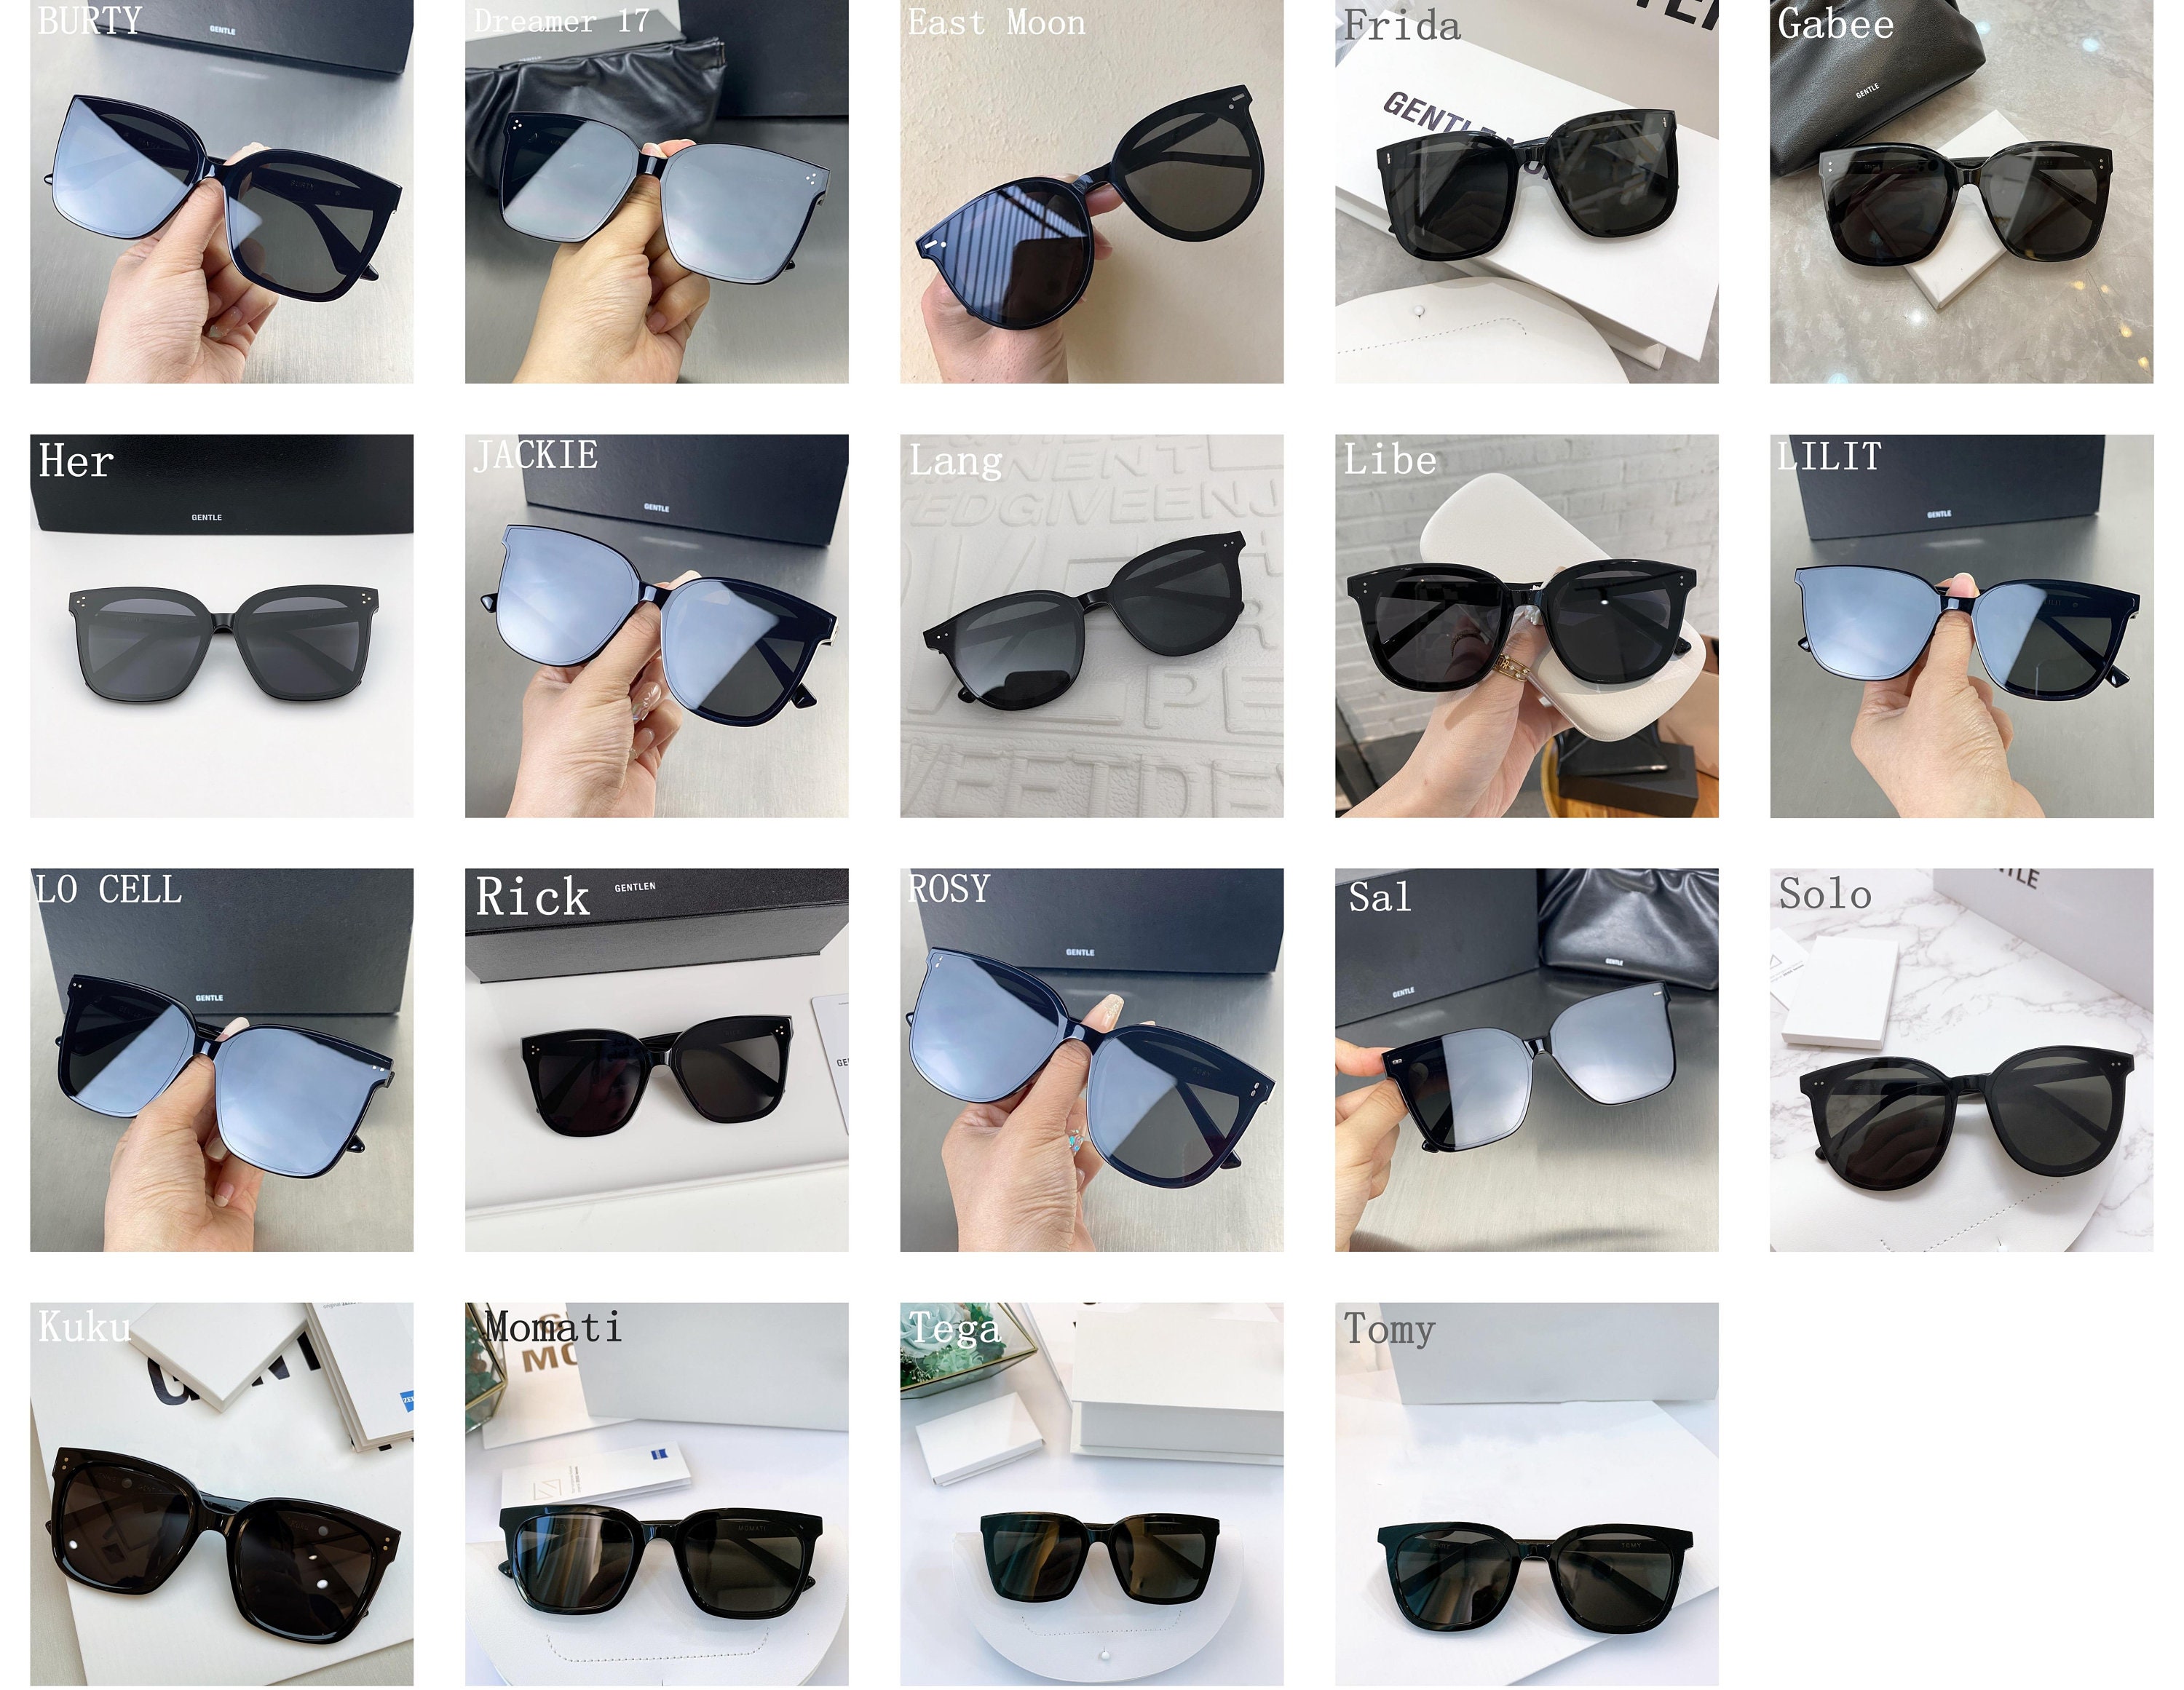 Live your K-drama fantasies with stylish sunnies worn by some of your  favourite Korean celebrities - AVENUE ONE